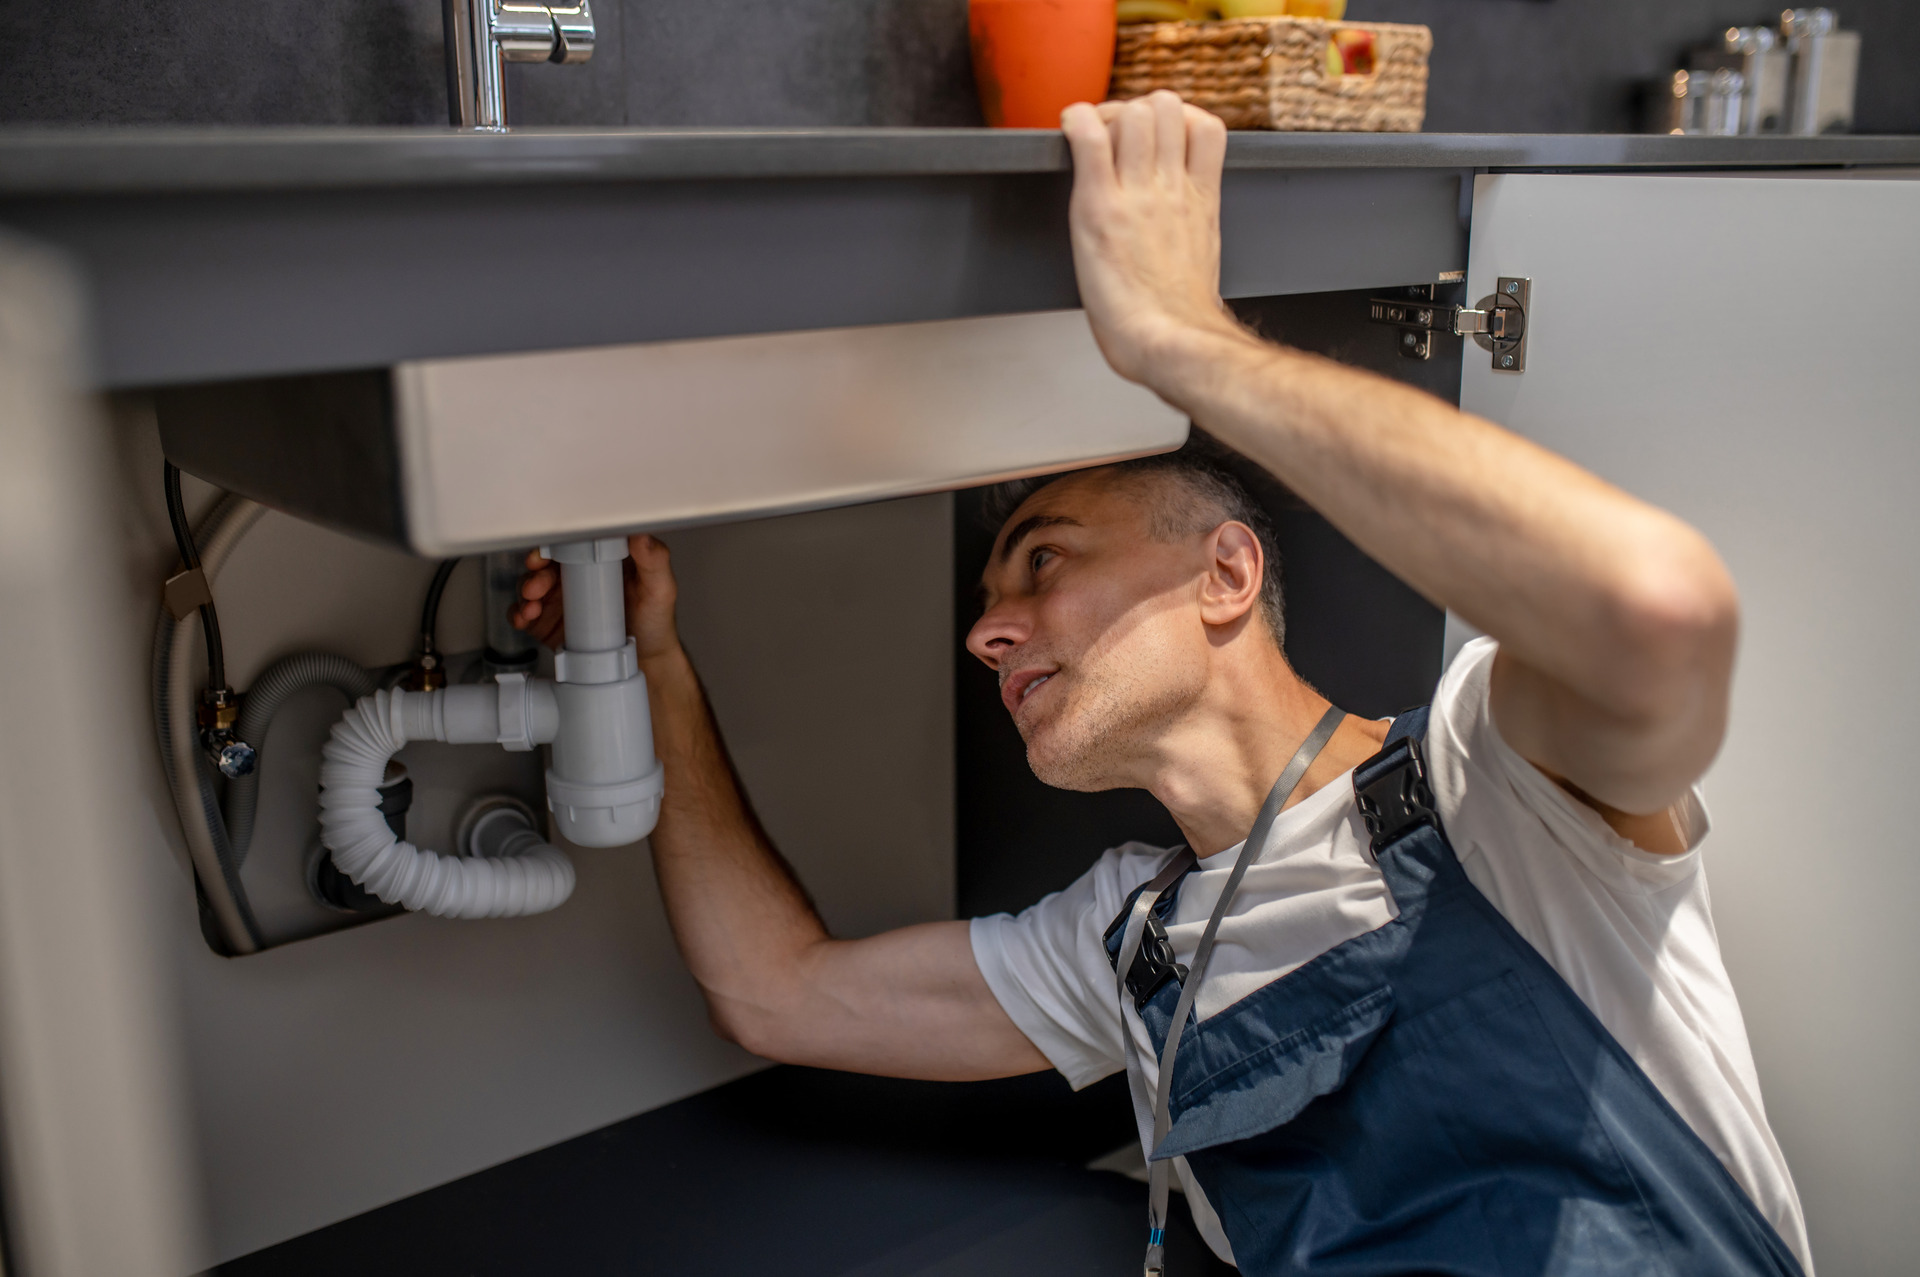 Emergency Plumber Services in Tamworth | Hire Now!